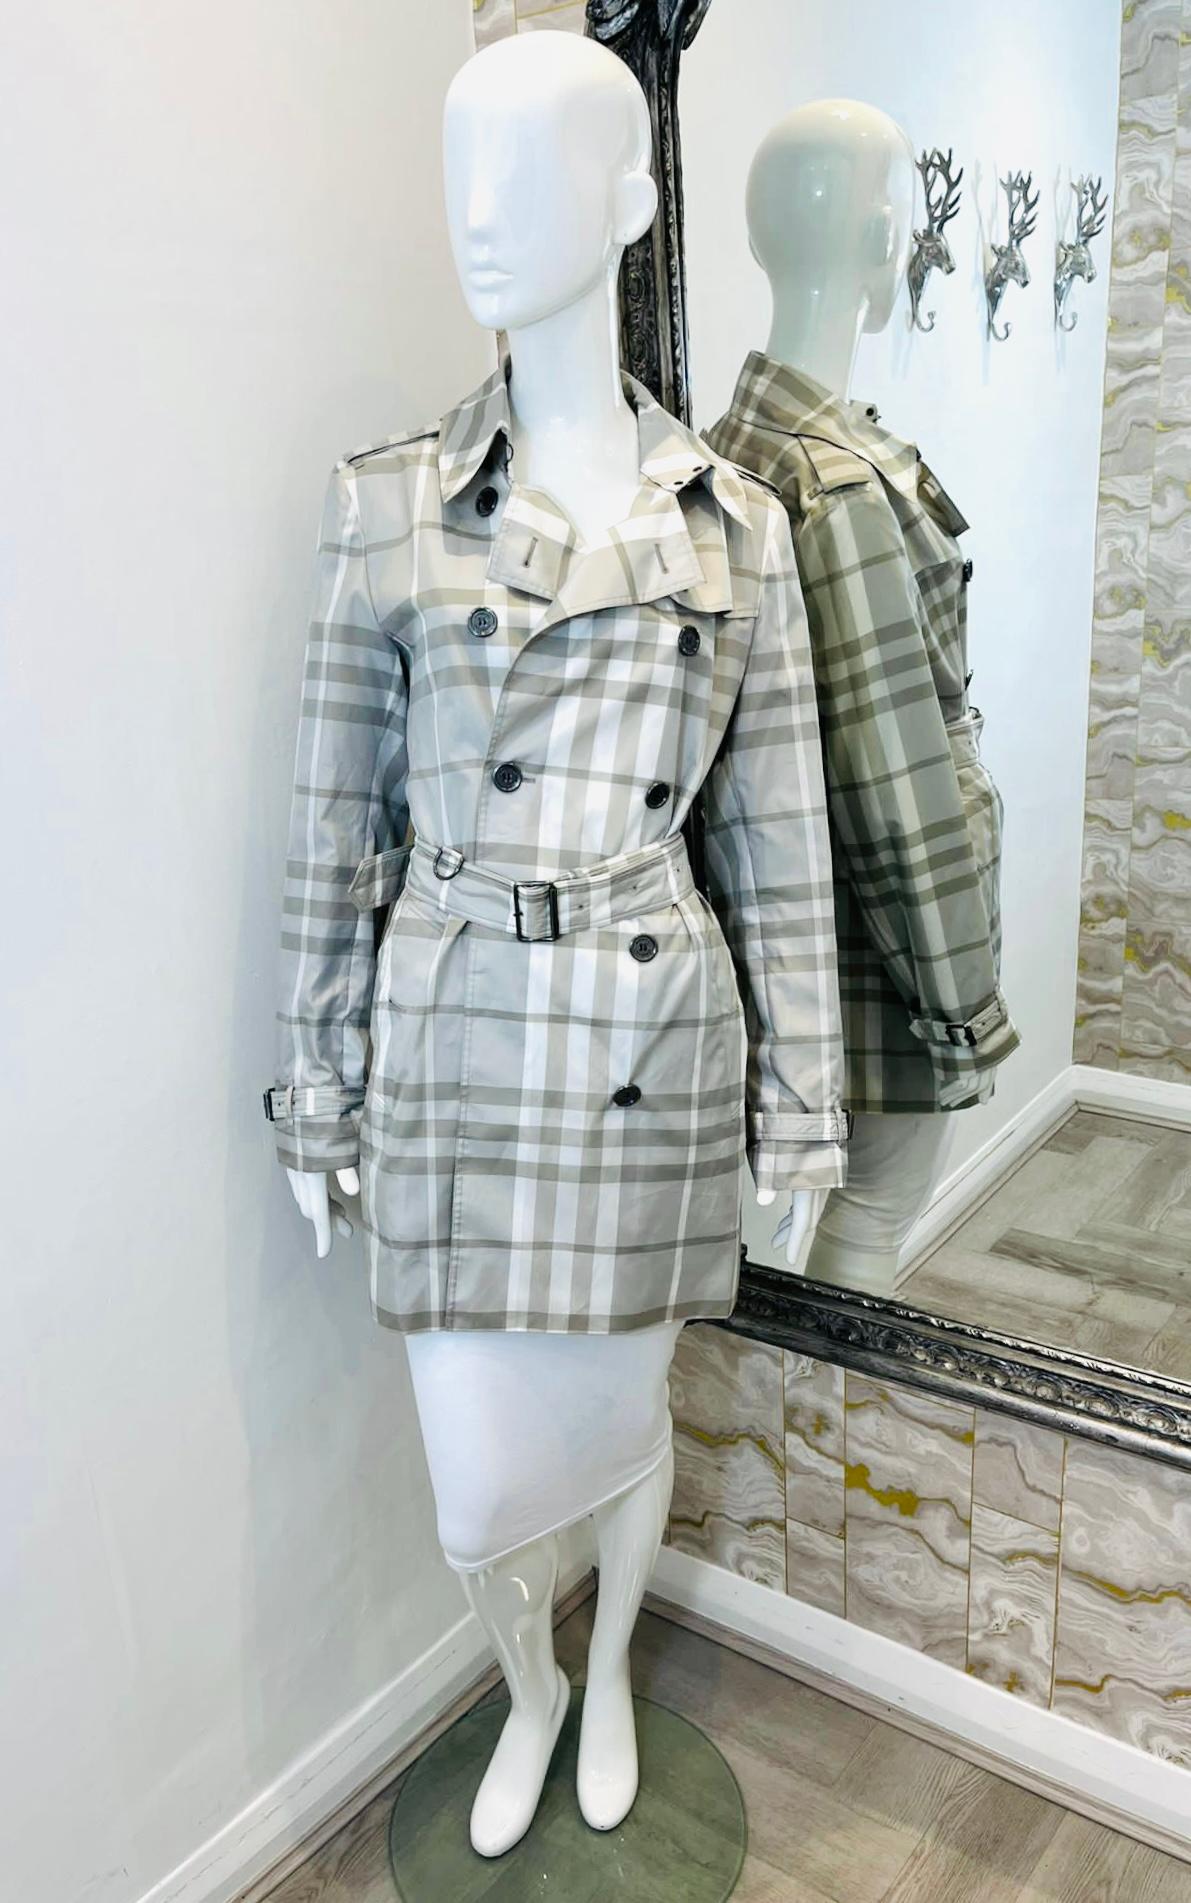 Burberry Brit Nova Check Trench Coat

Classic, lightweight trench coat designed with plaid check pattern in grey.

Detailed with double-breasted style and belted waist.

Featuring black 'Burberry' logo engraved buttons, shoulder epaulettes and